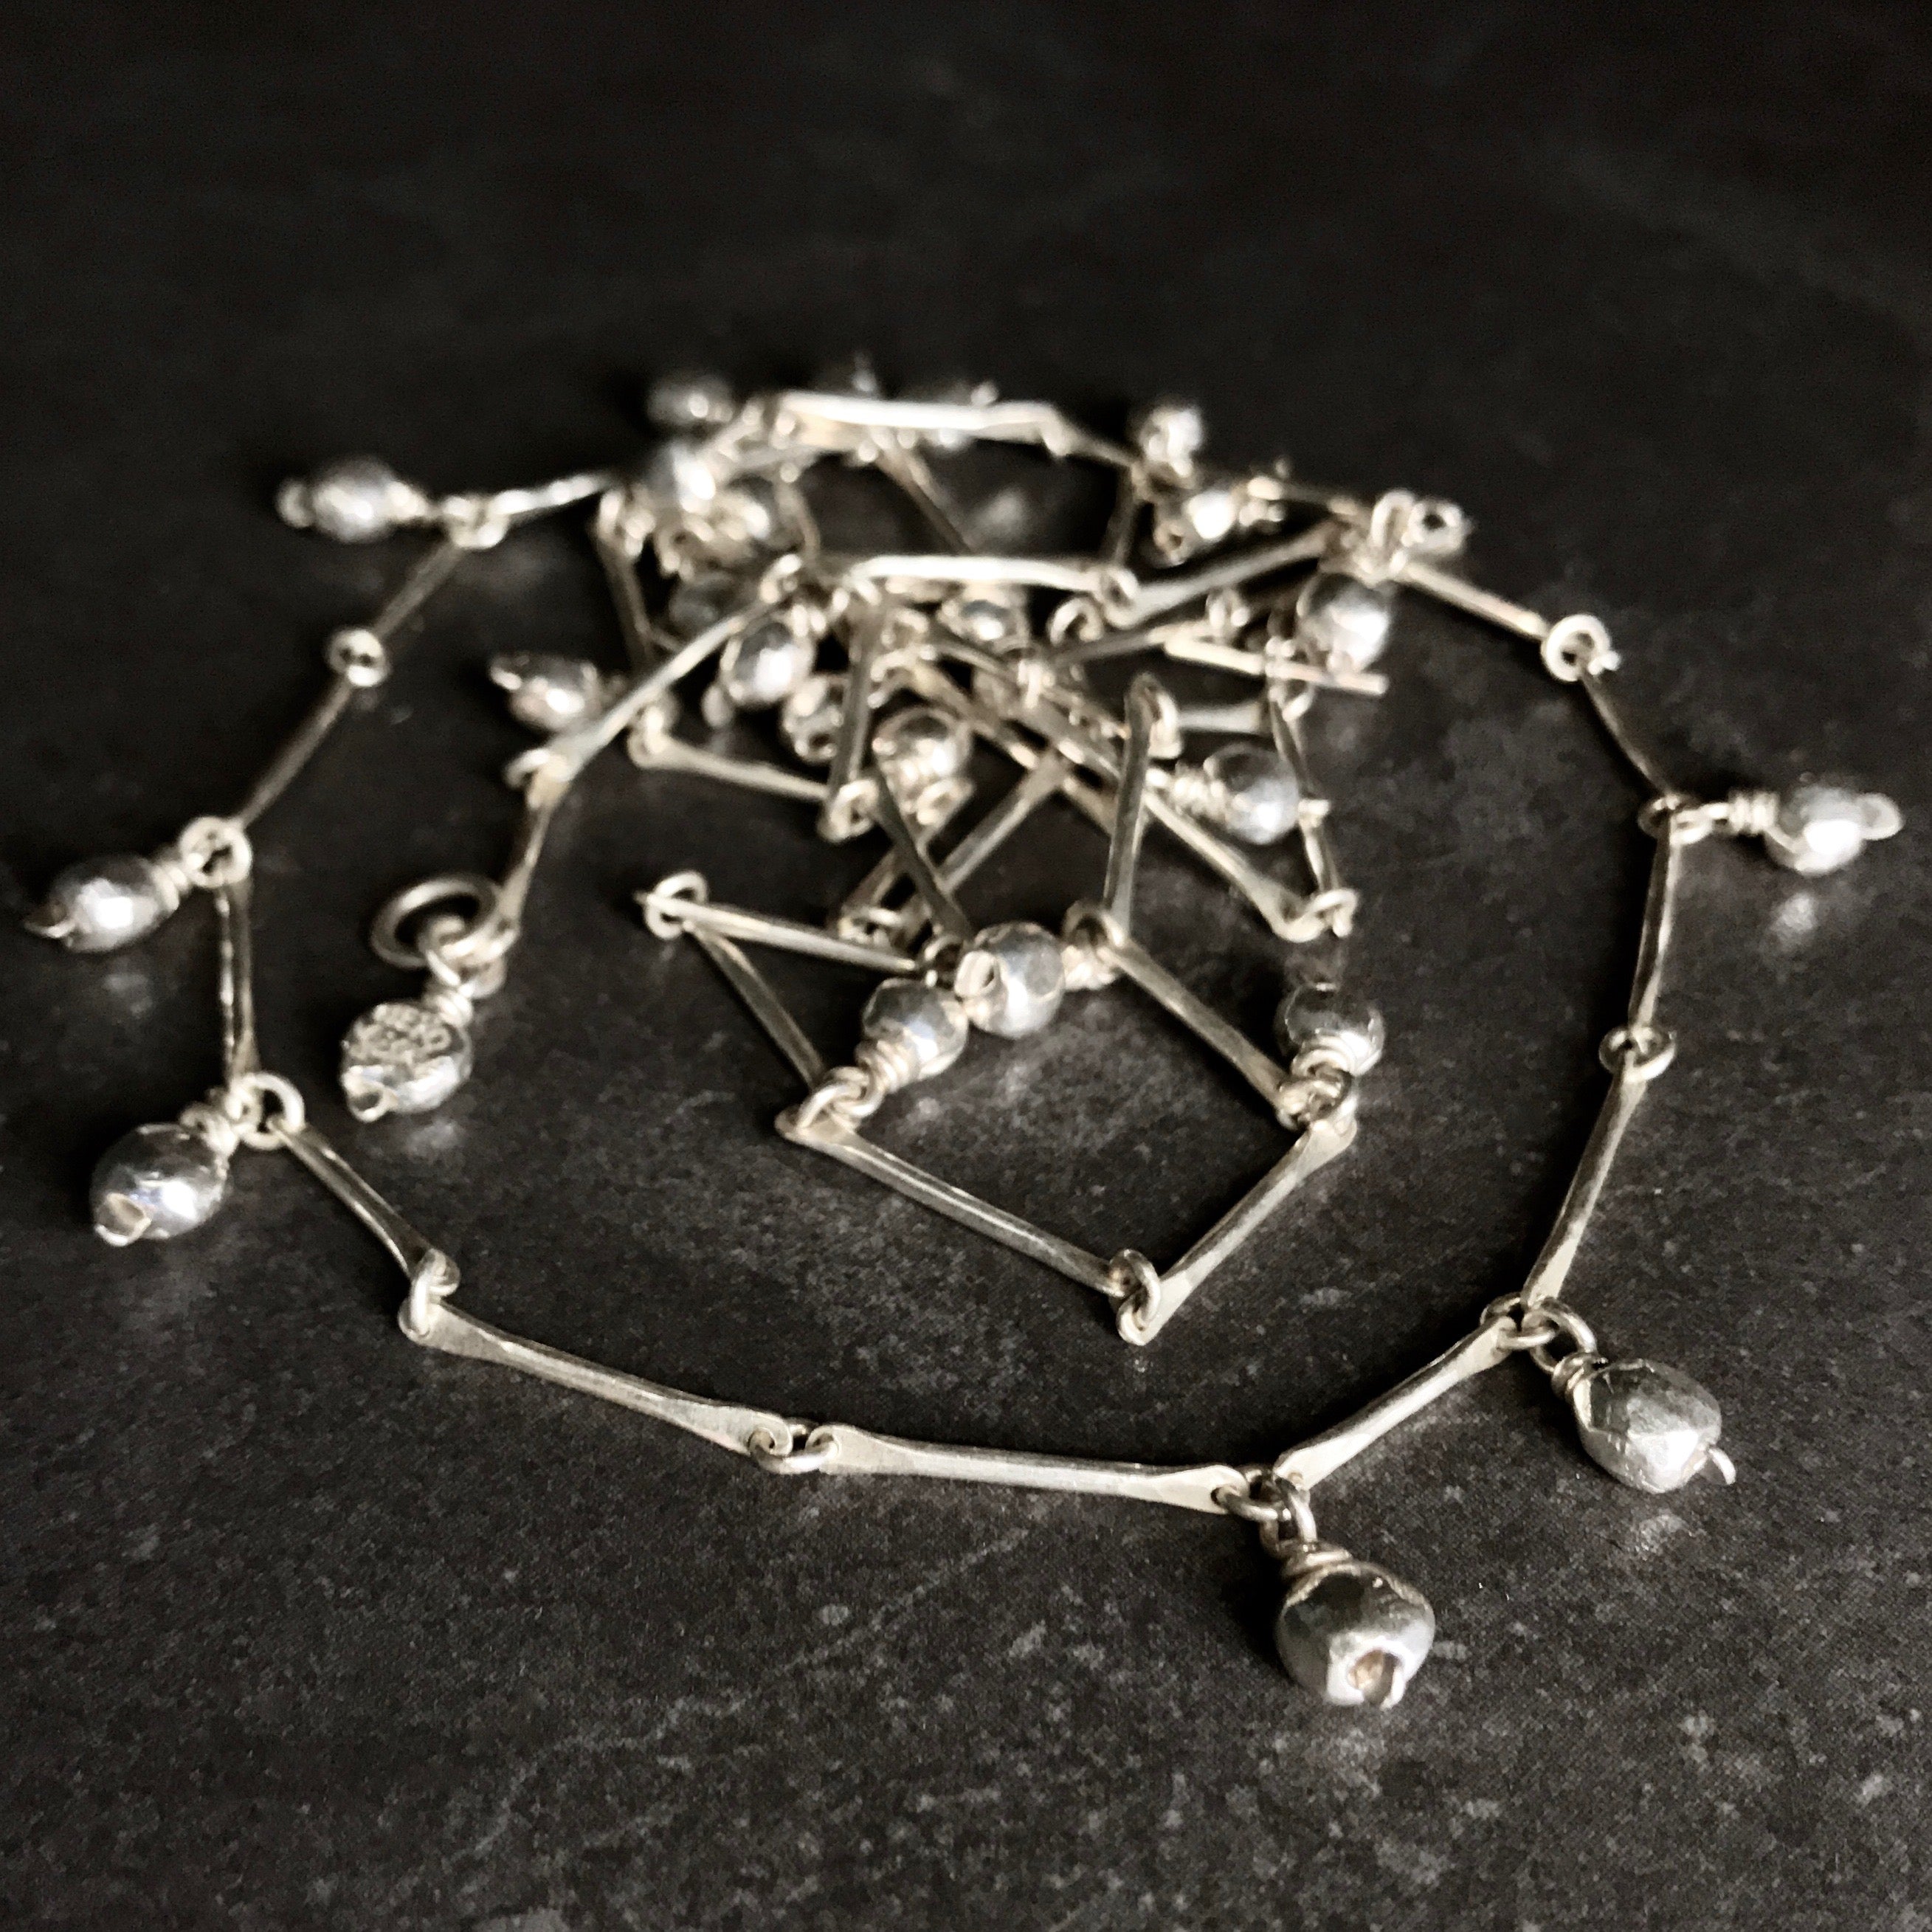 PICOLO2201 Necklace  by herosisters - Luxury handmade silver jewelry and accessories